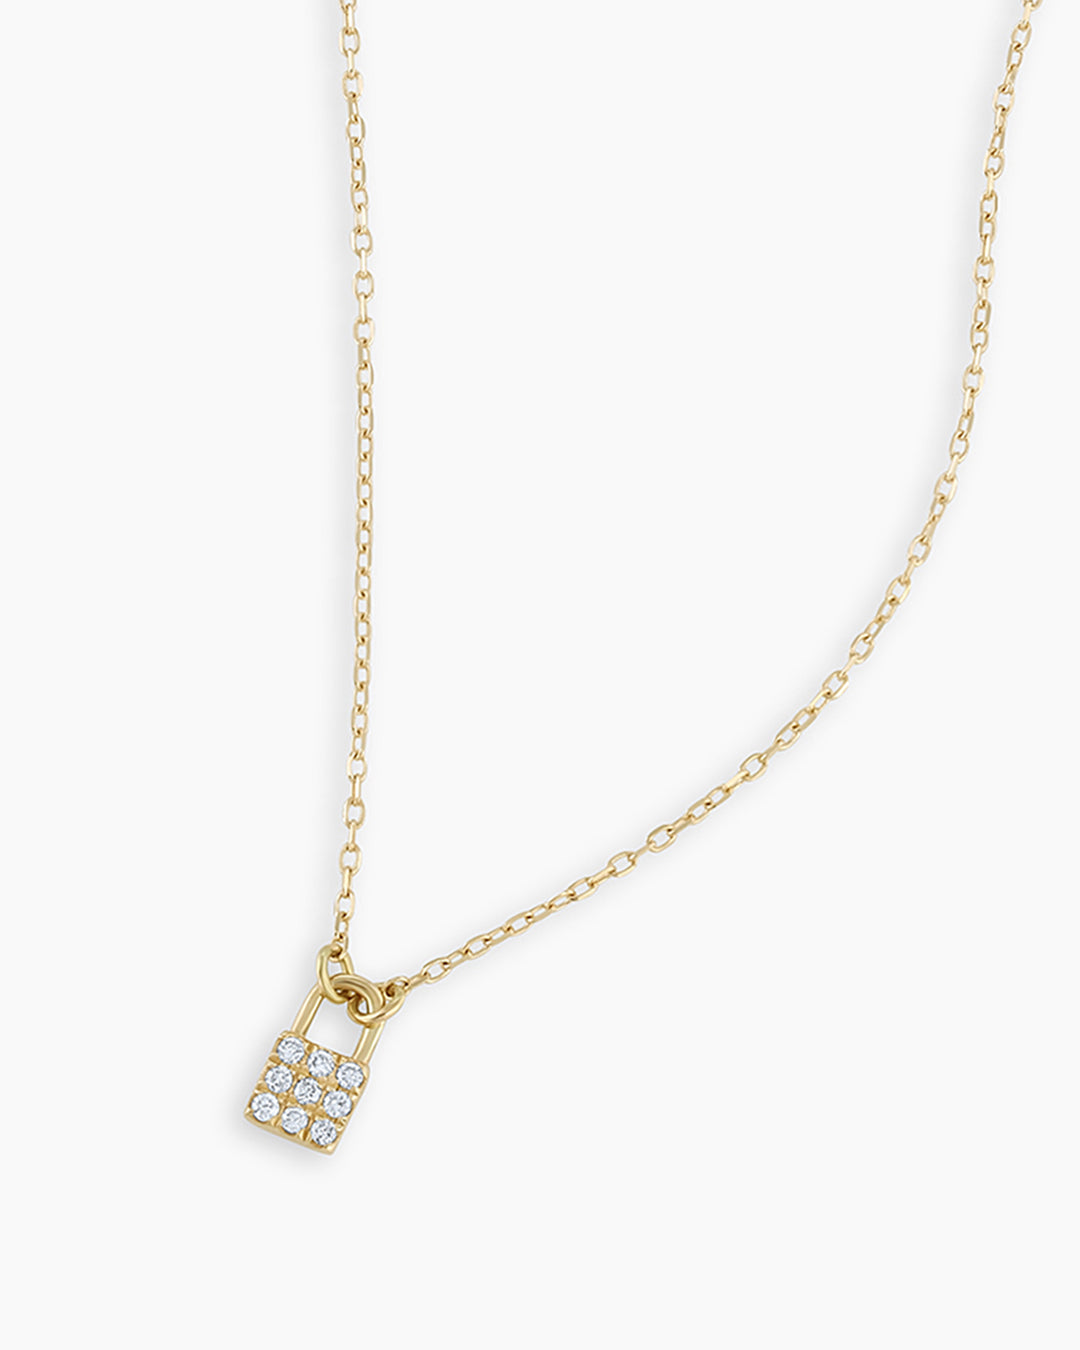 14K Solid Gold Heart Charm Lock Necklace with Diamonds